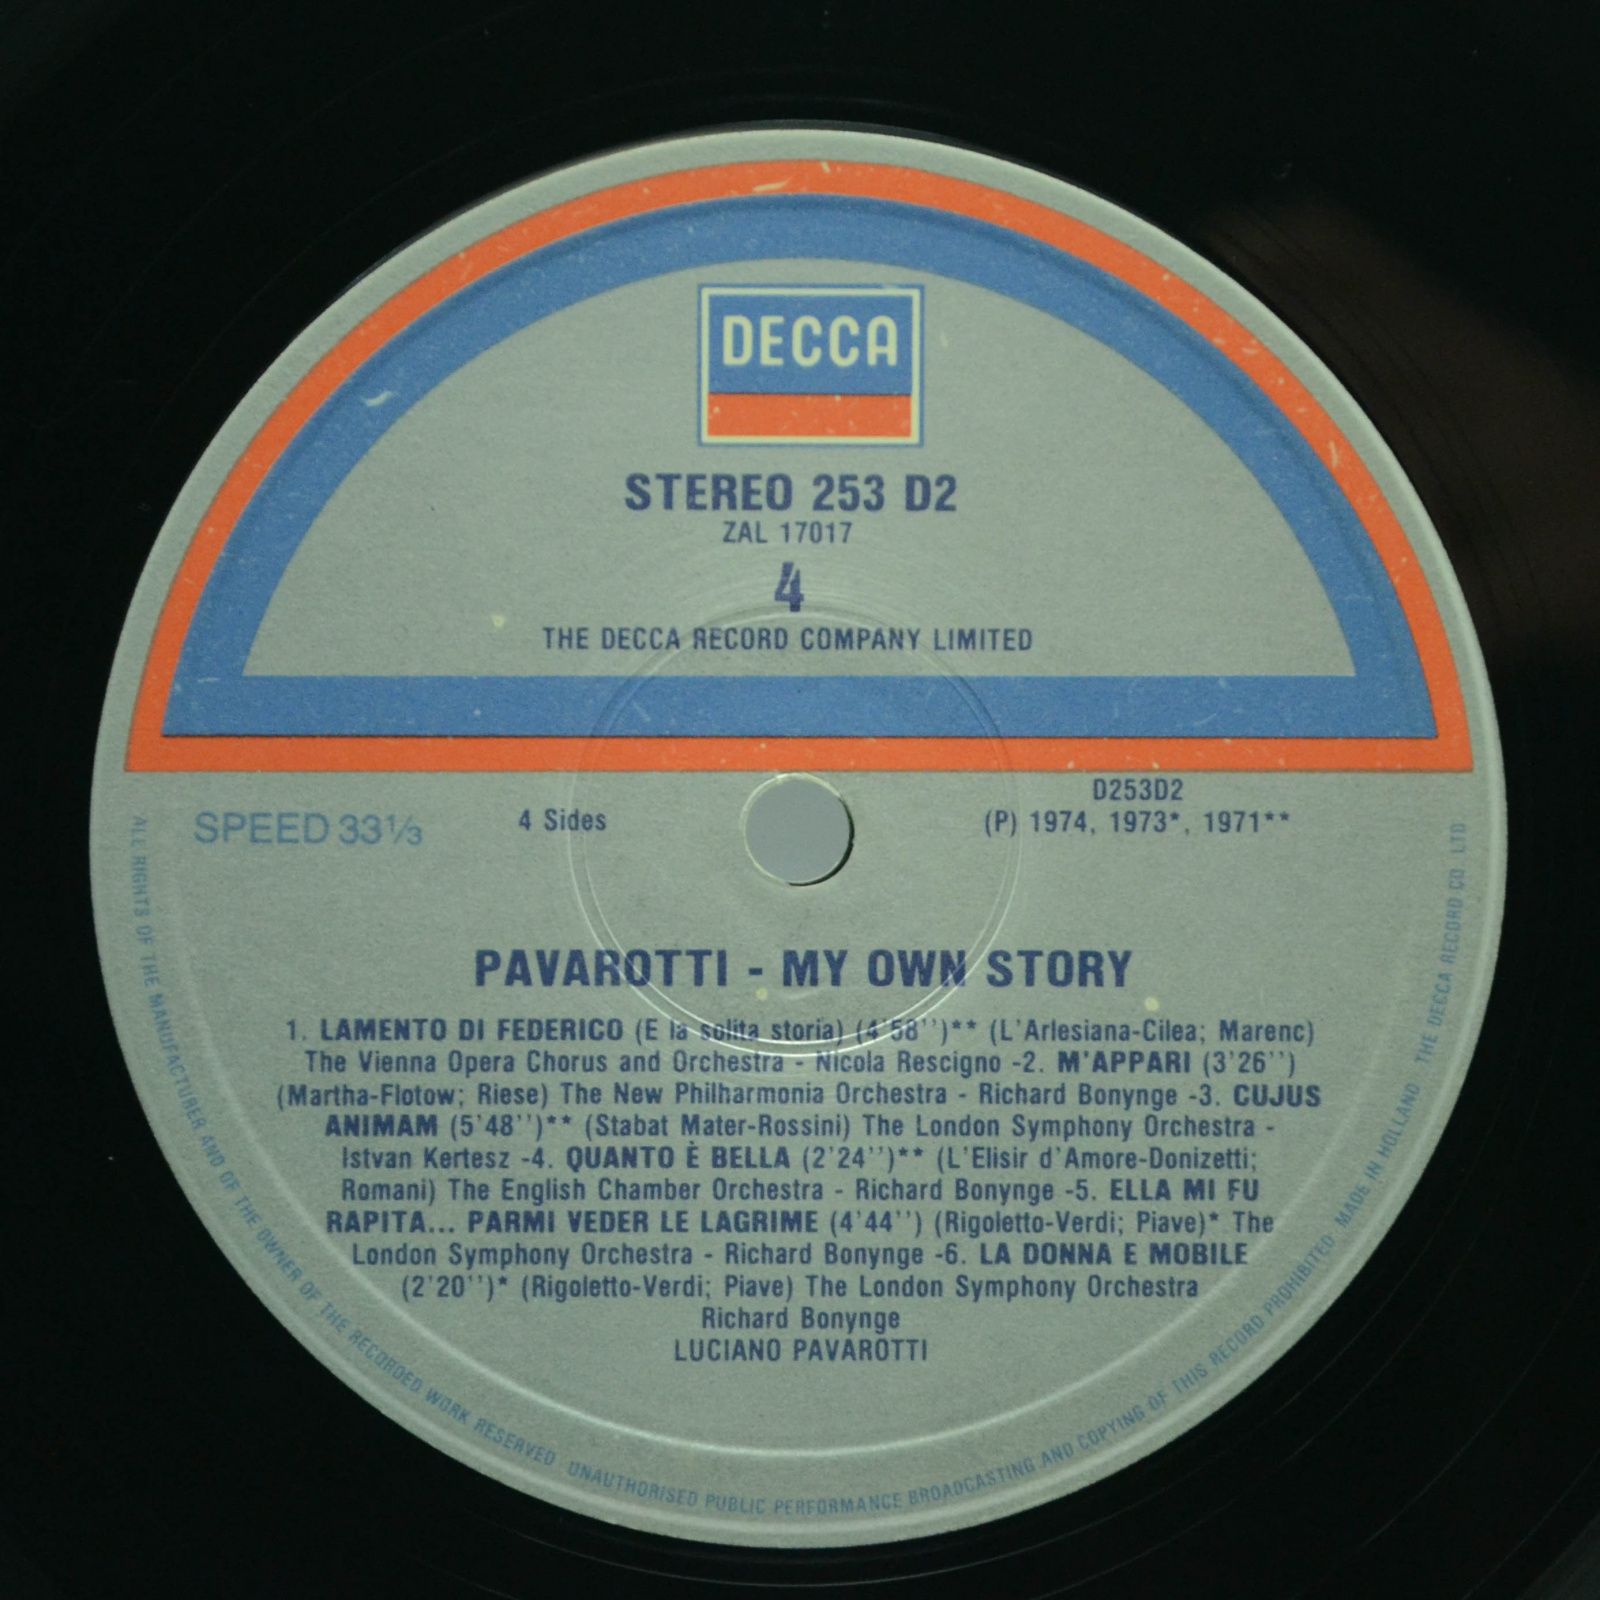 Luciano Pavarotti — My Own Story (2LP, booklet), 1981